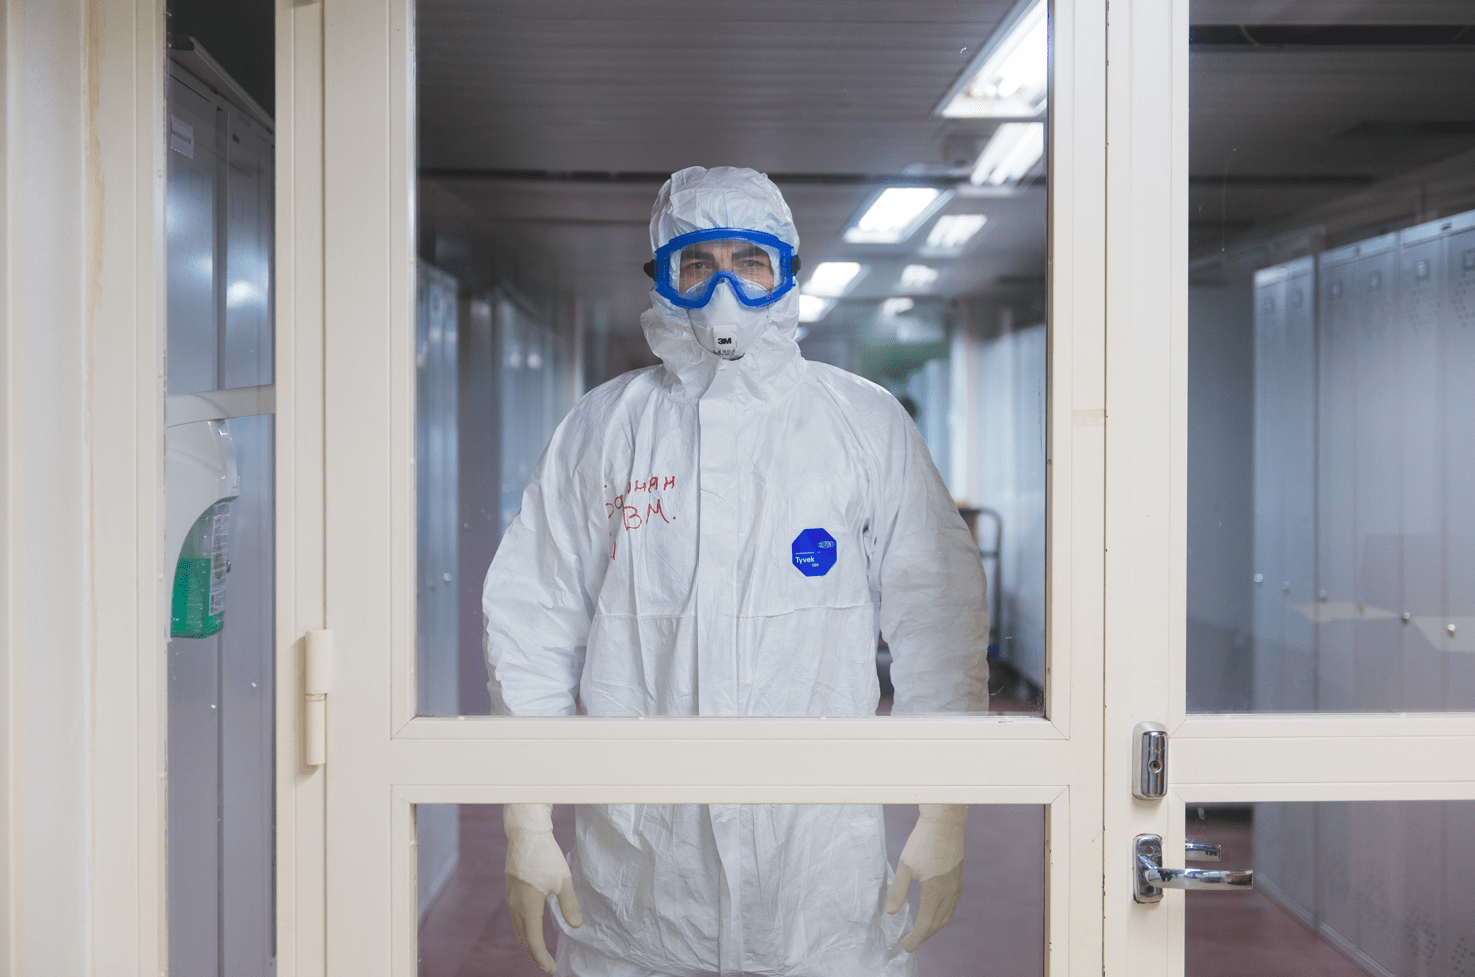 A healthcare worker wearing an N95 Mask with PPE